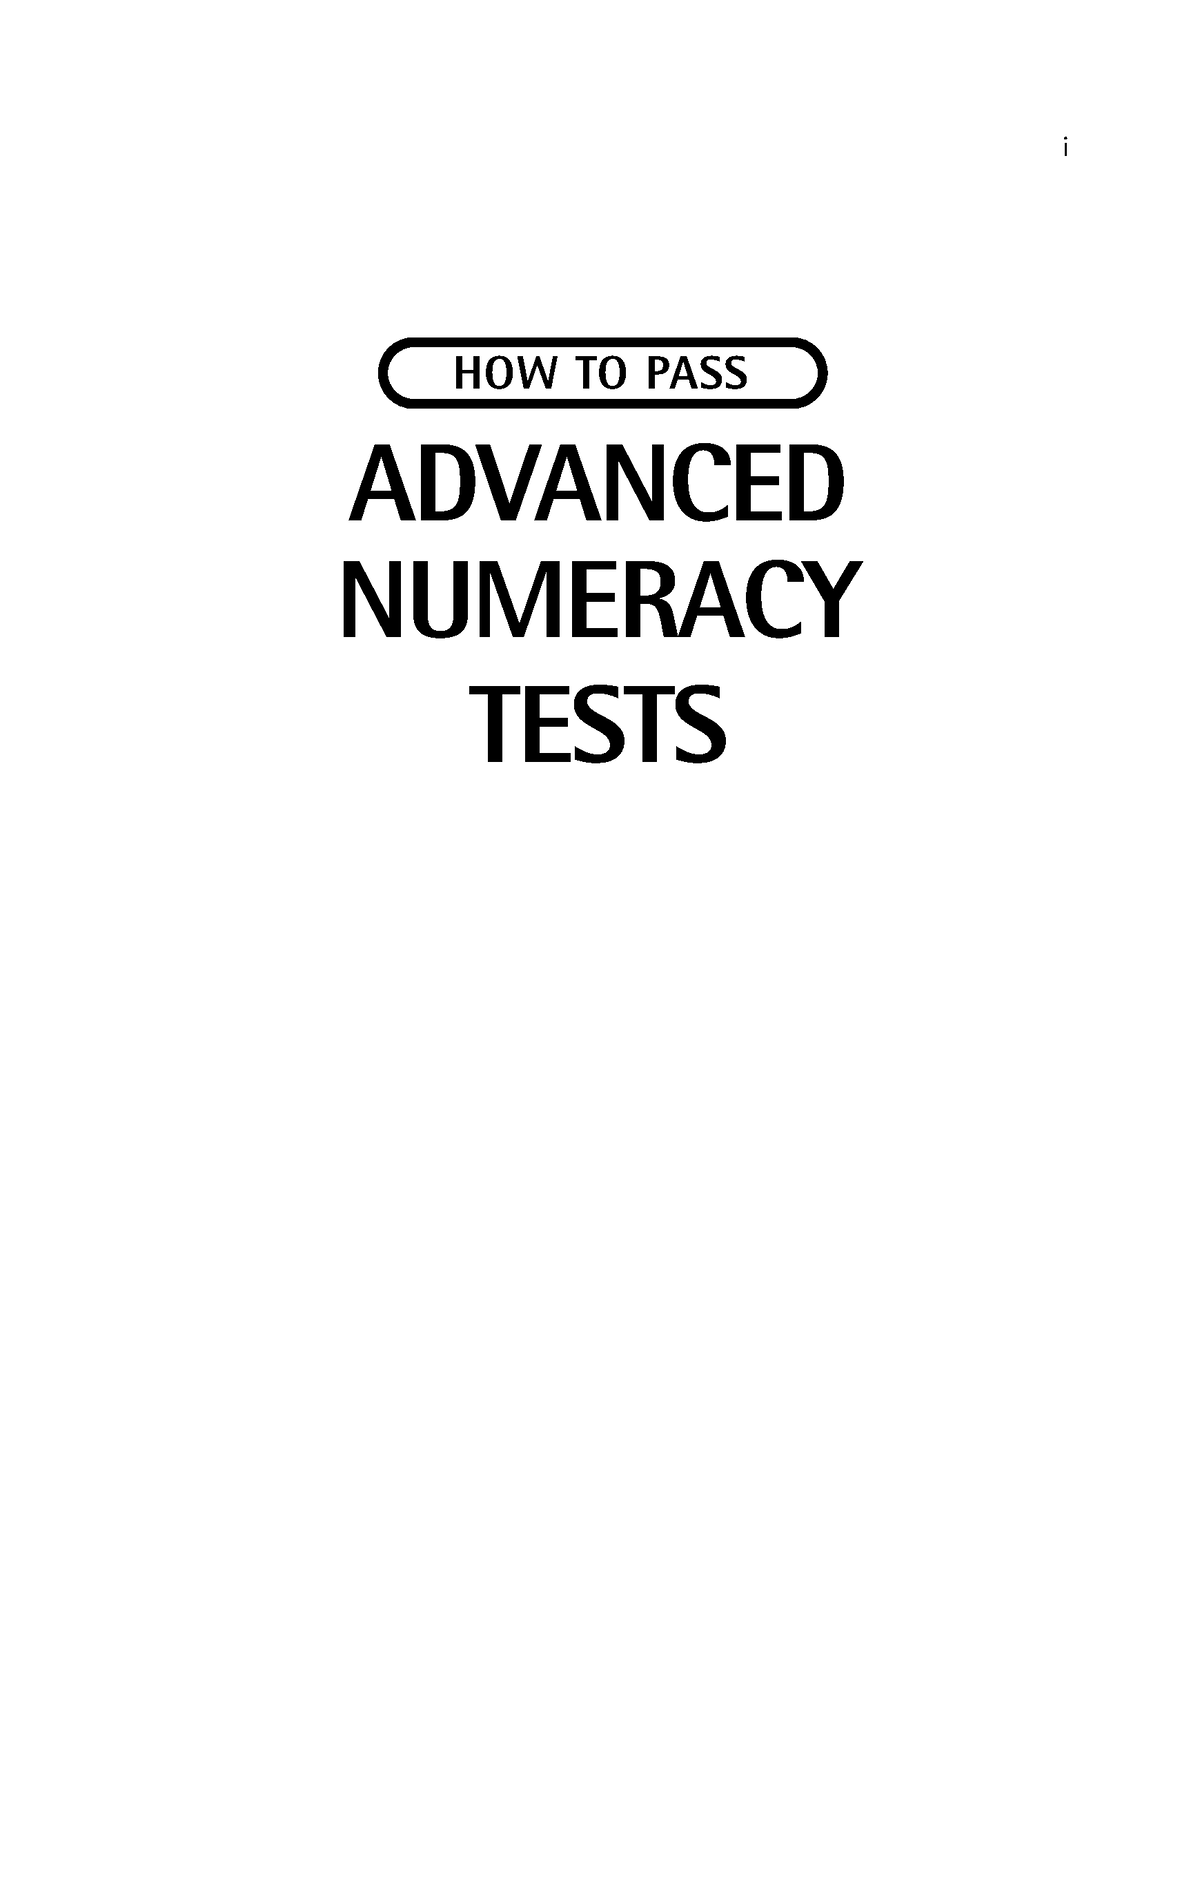 how-to-pass-advanced-numeracy-tests-i-advanced-numeracy-tests-how-to